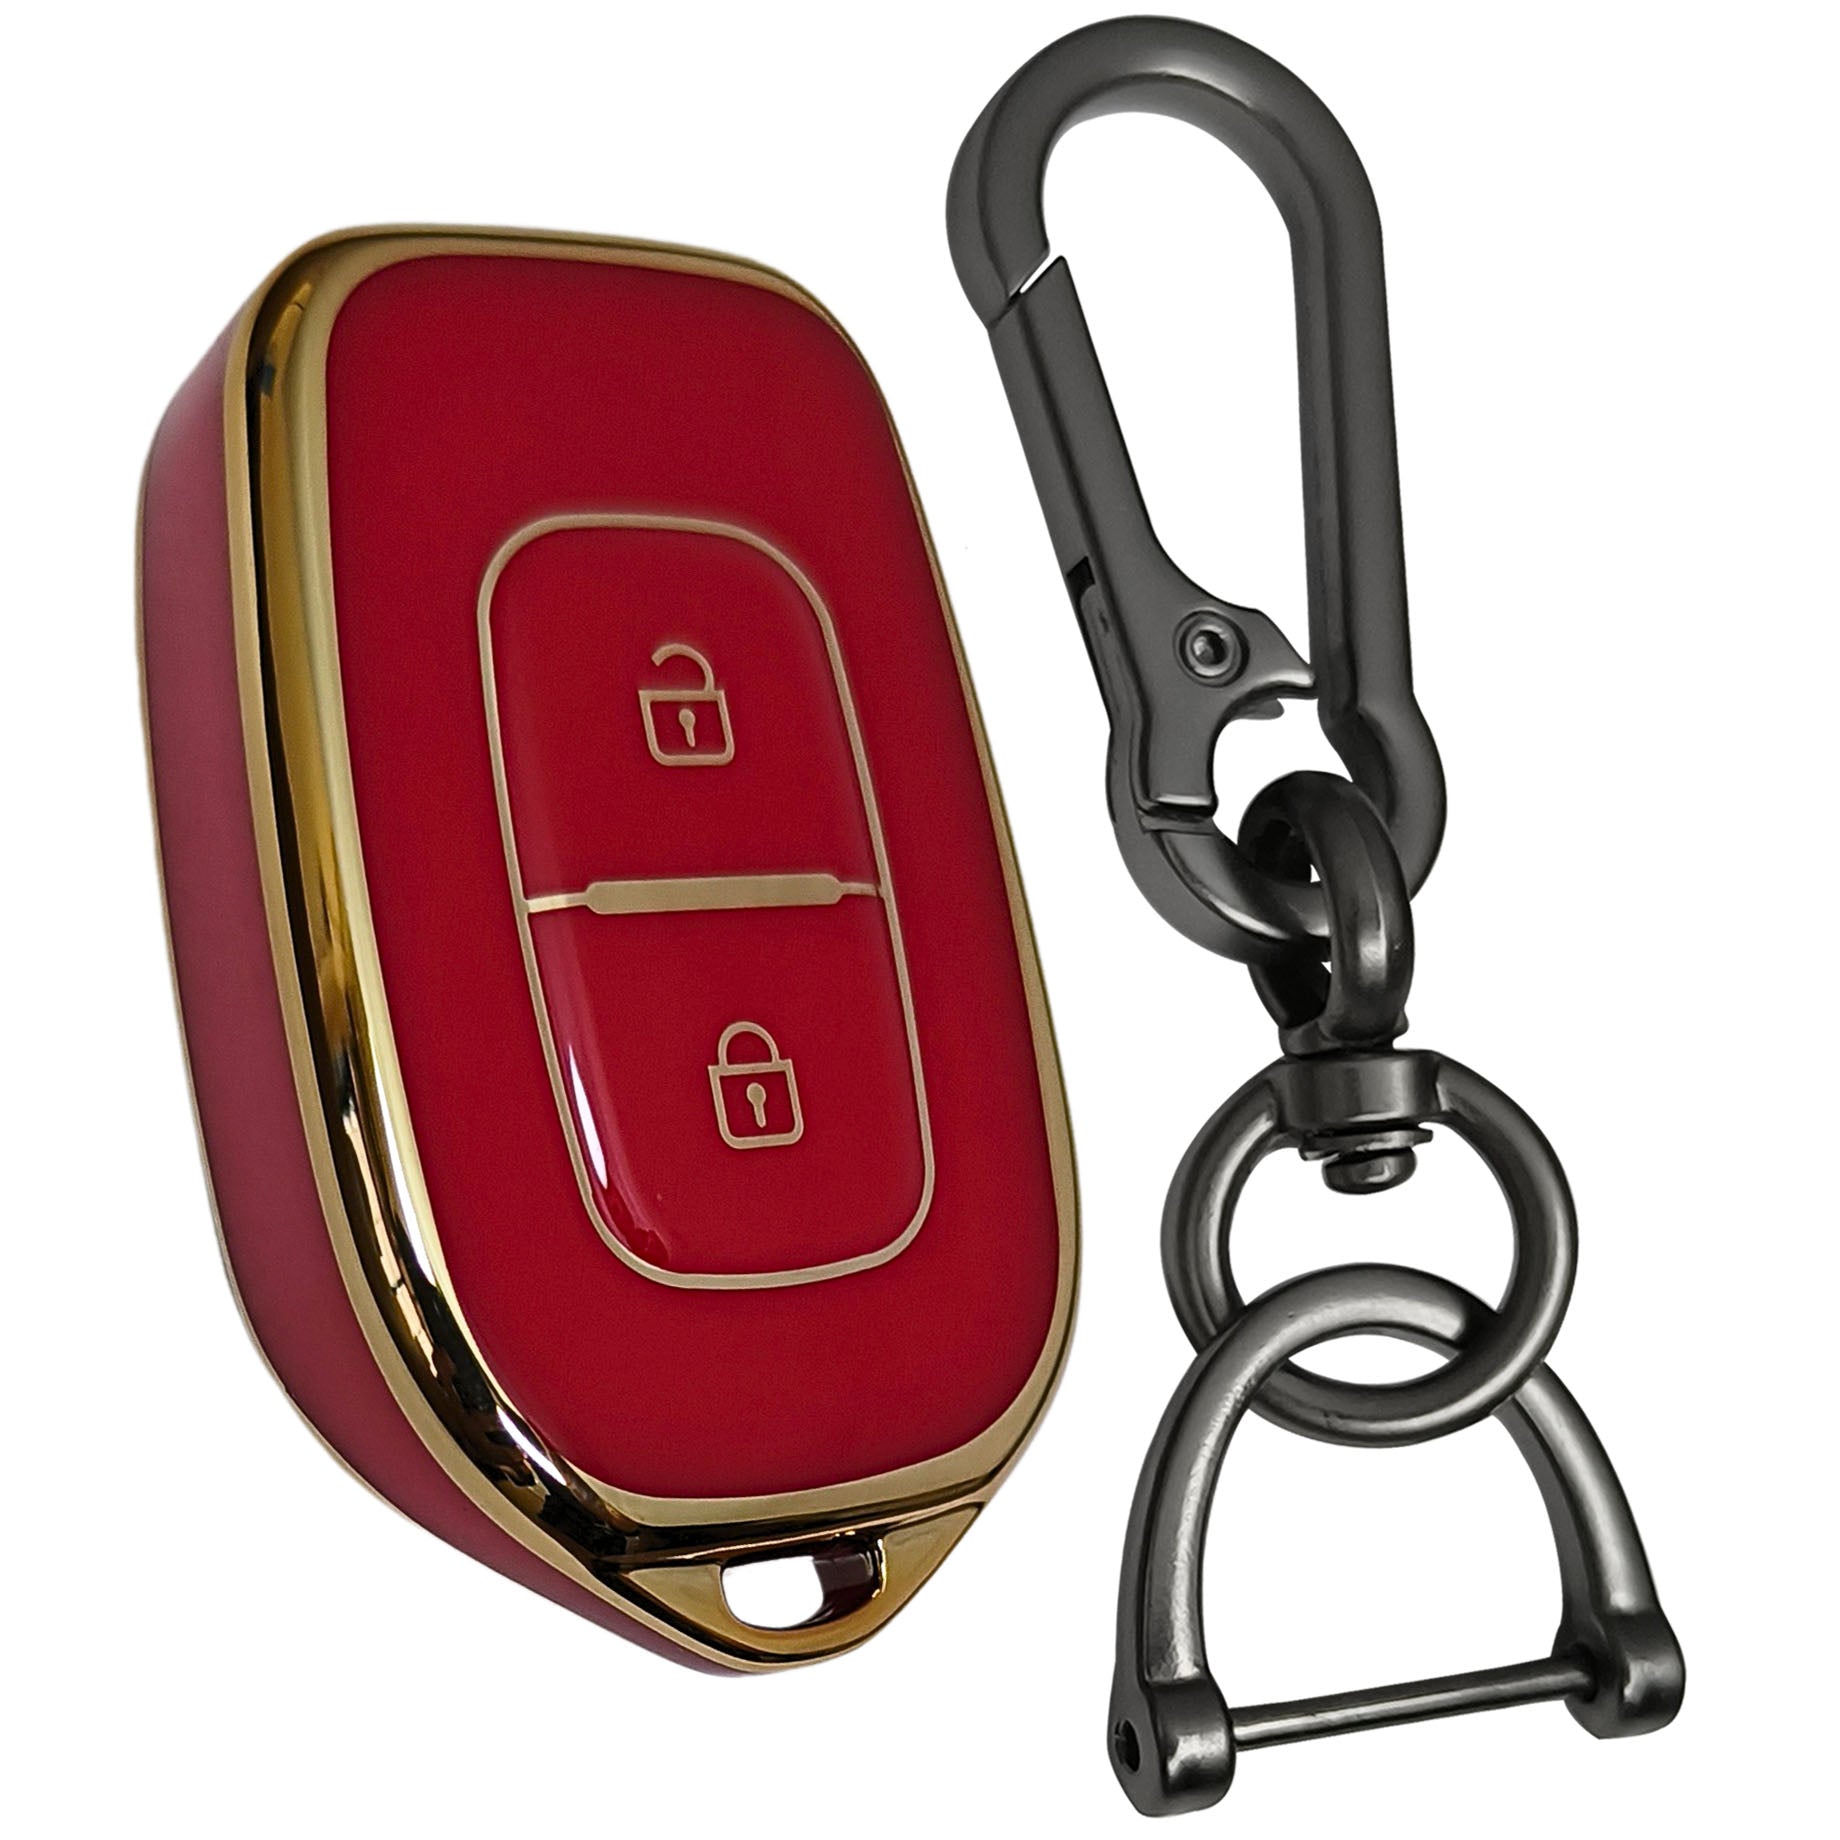 renault kwid kiger duster 2 button remote tpu red gold key cover keychain